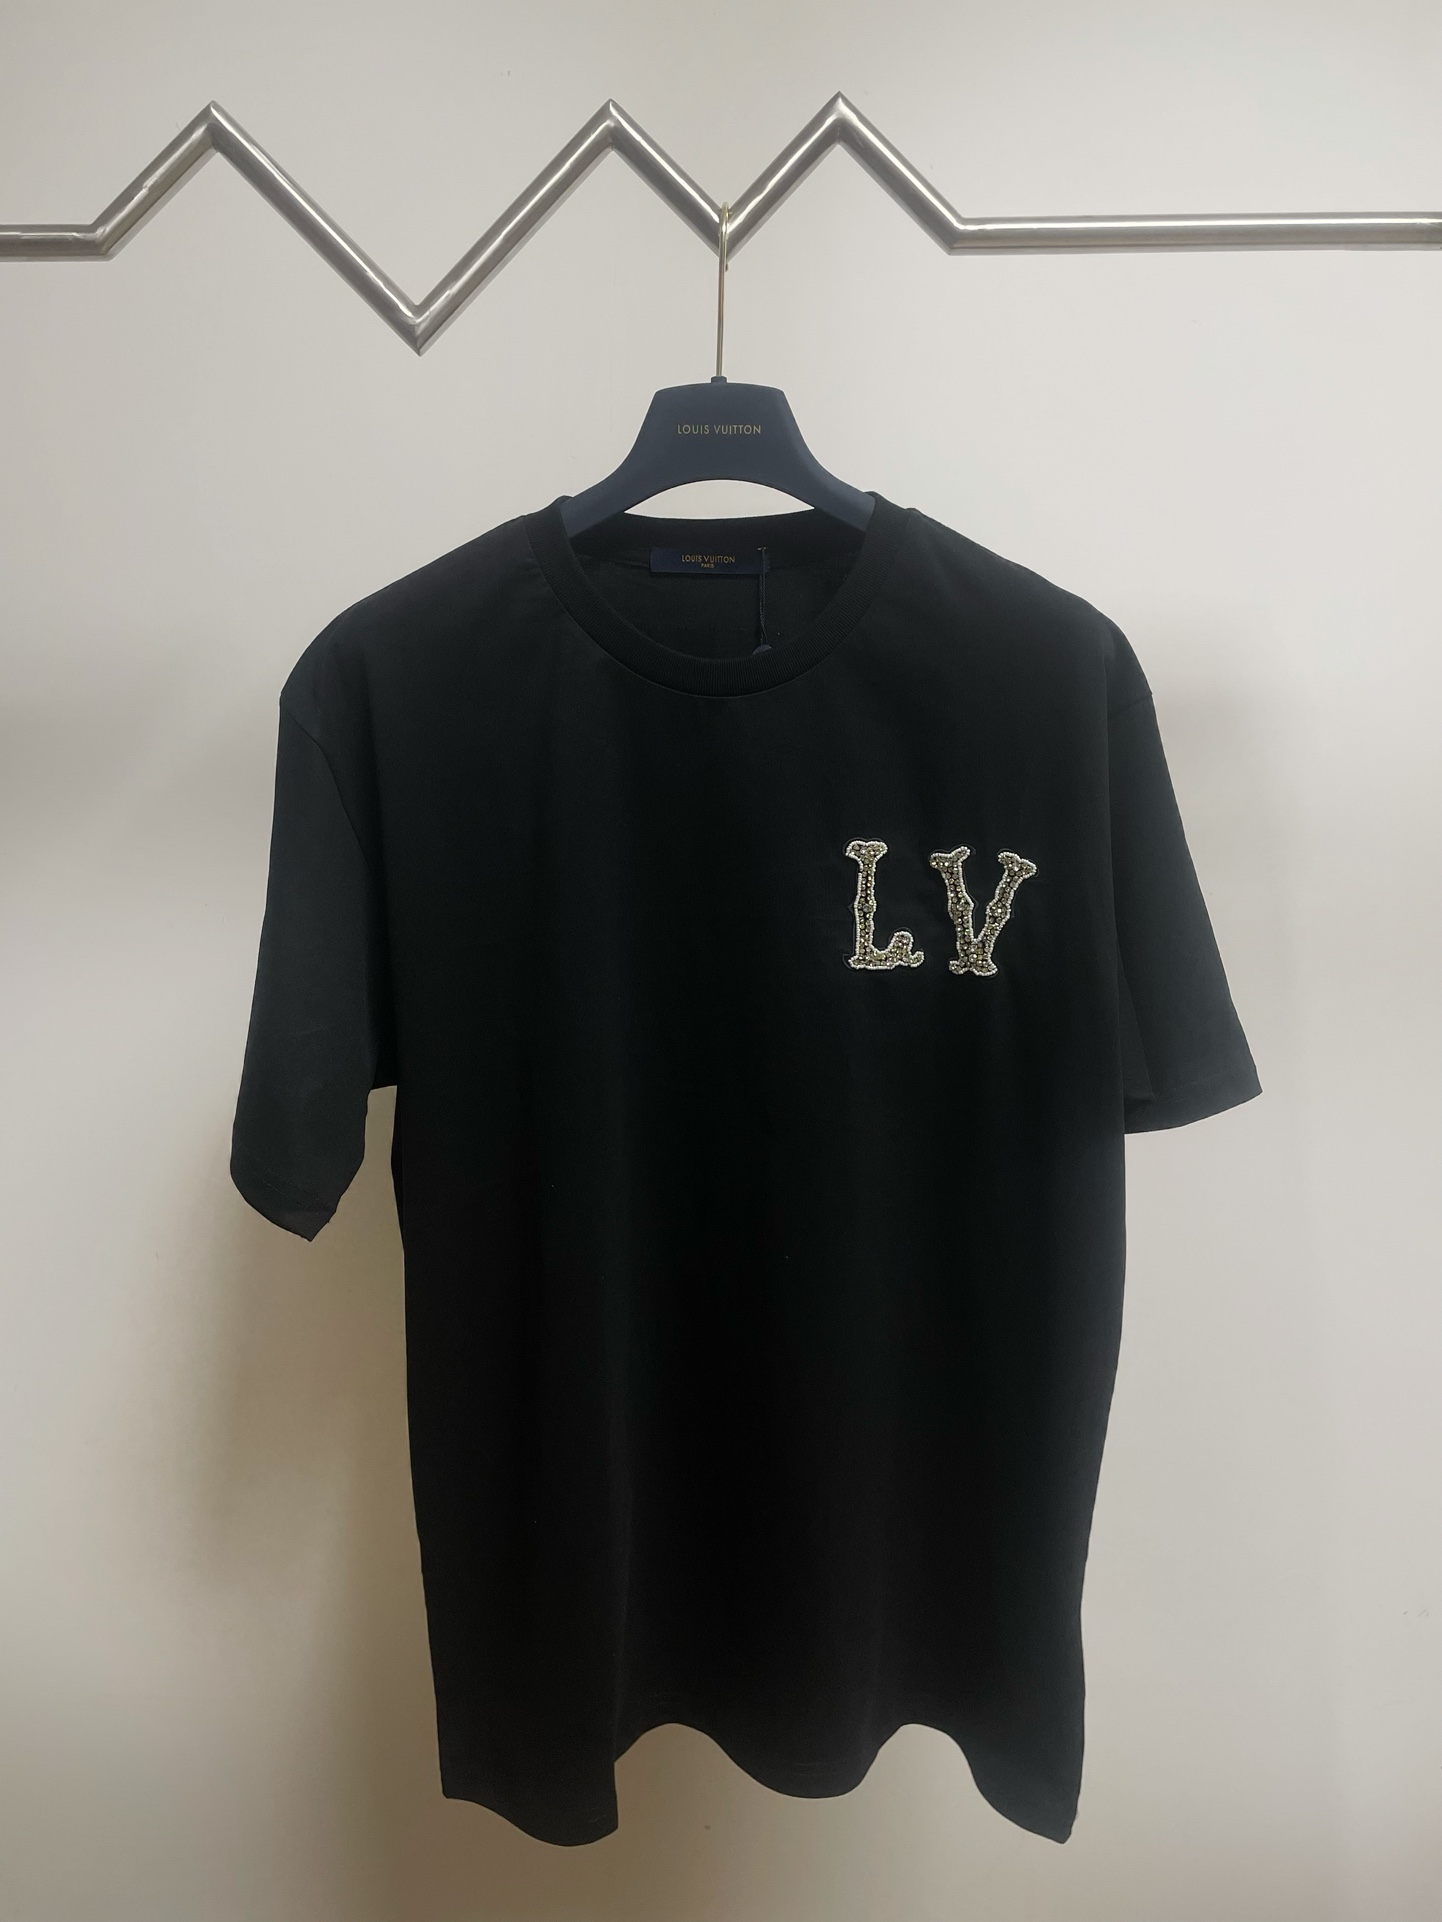 Designer Replica
 Louis Vuitton Clothing T-Shirt Black Embroidery Unisex Cotton Spring/Summer Collection Short Sleeve